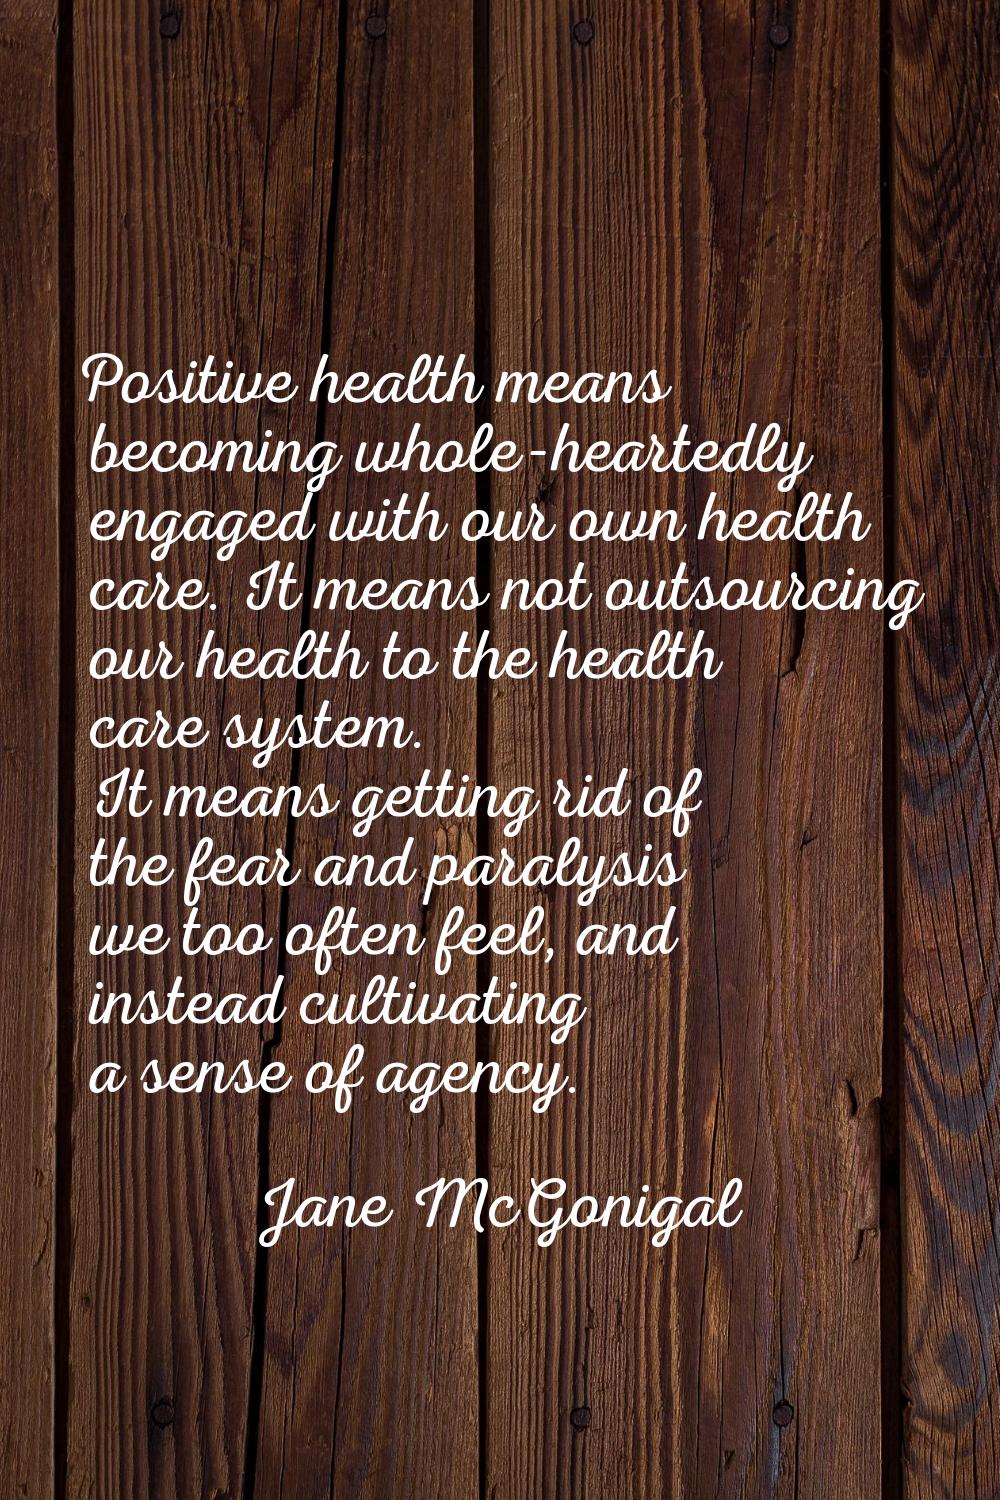 Positive health means becoming whole-heartedly engaged with our own health care. It means not outso